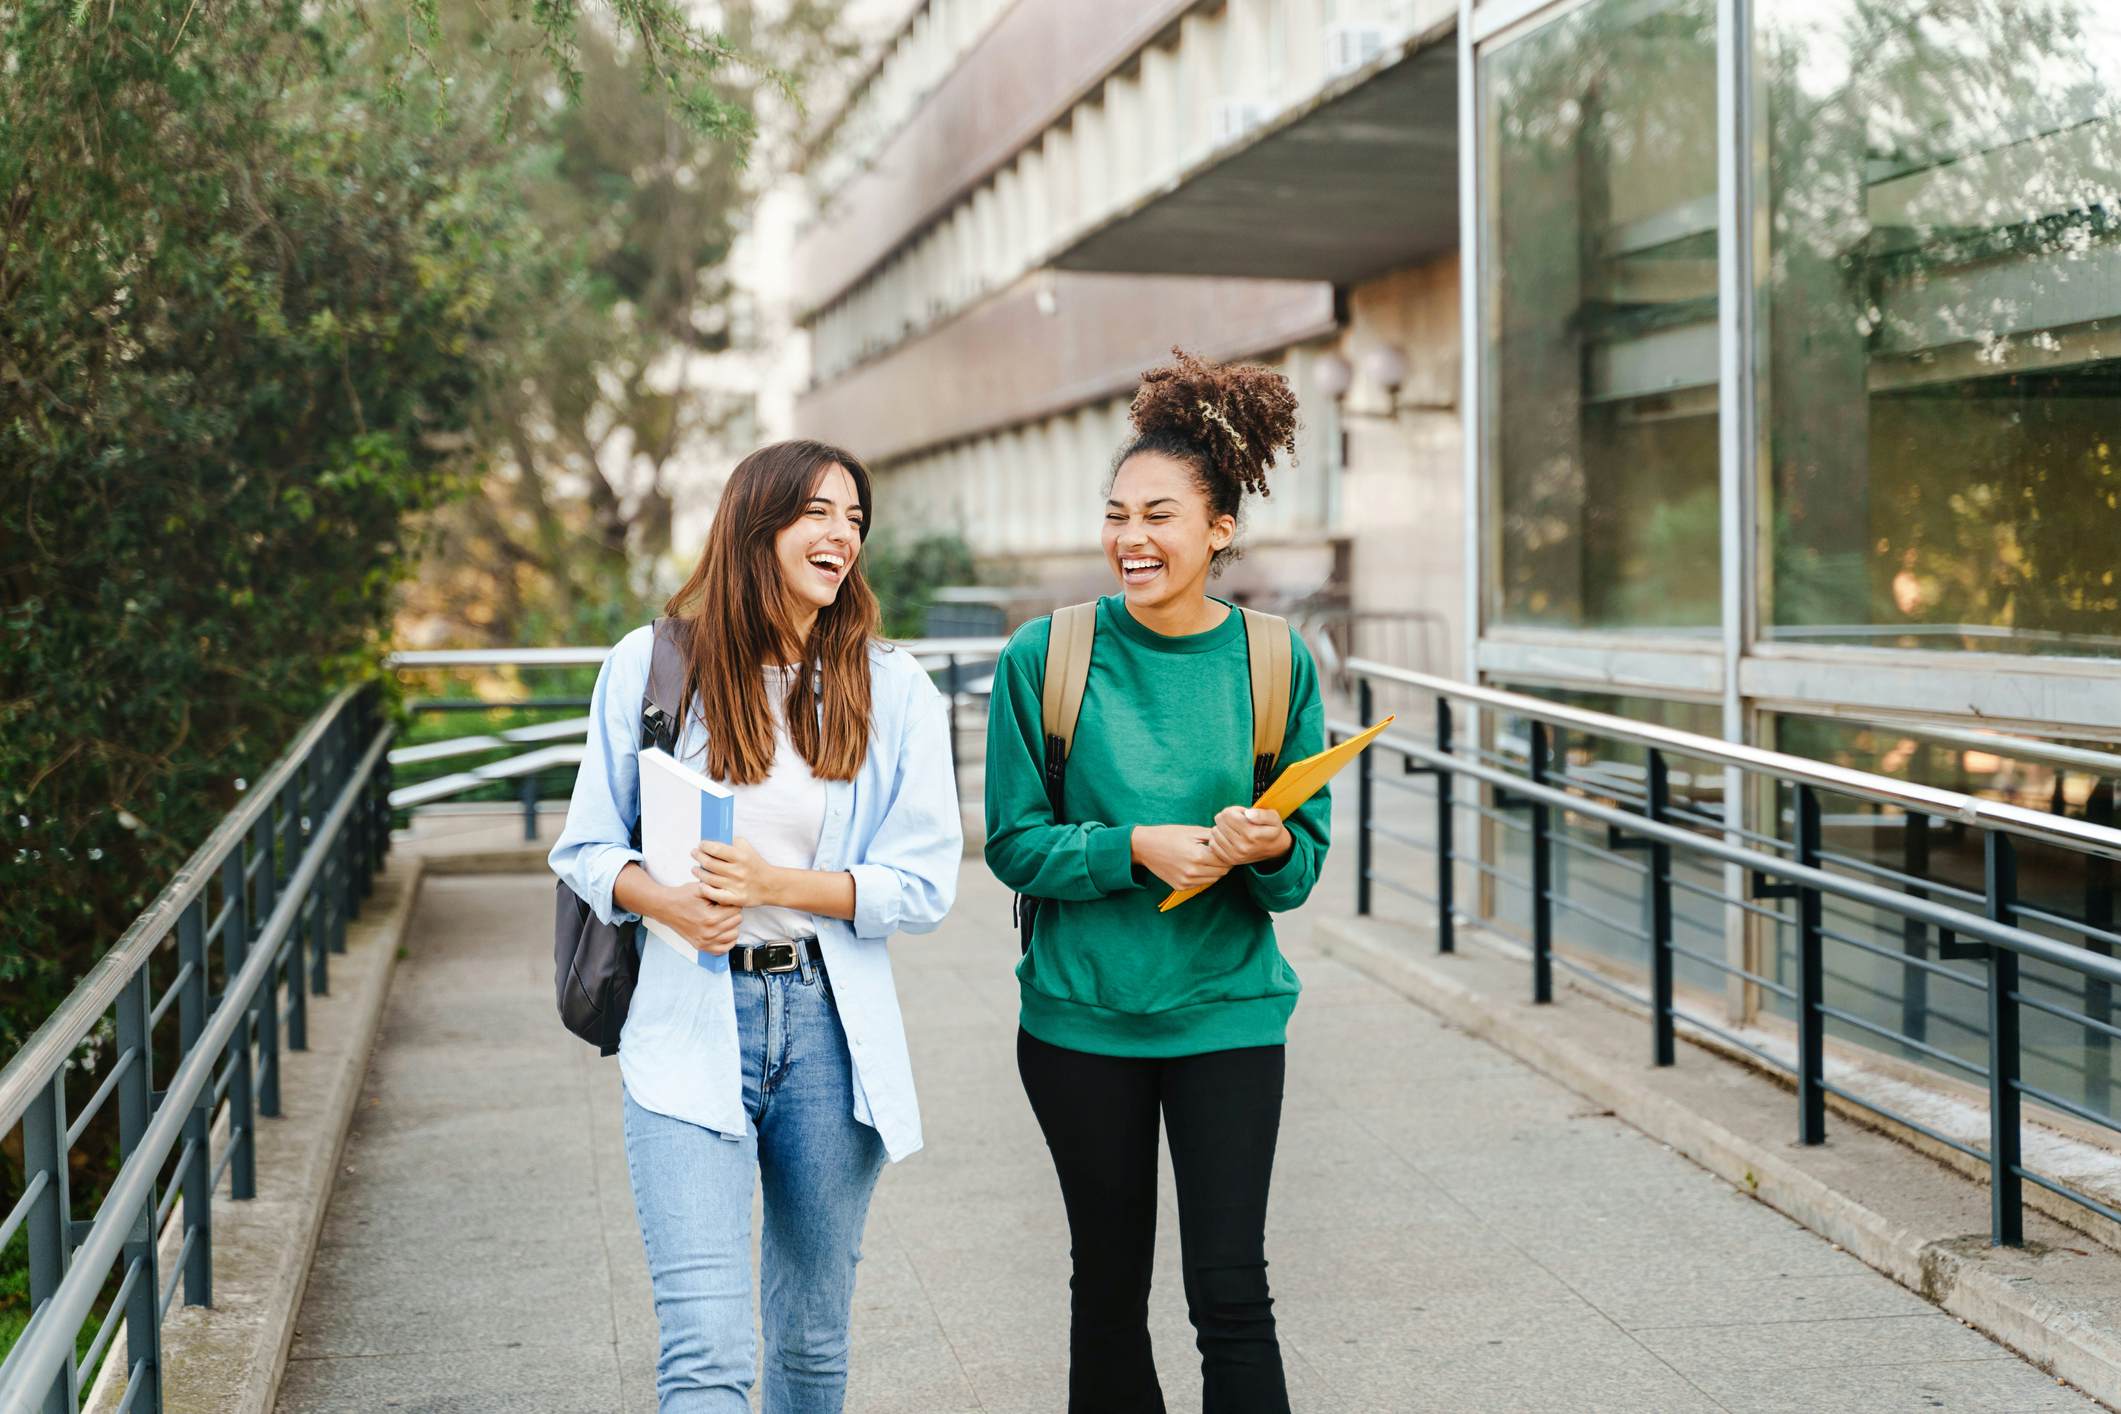 Two female students walking together on a college campus